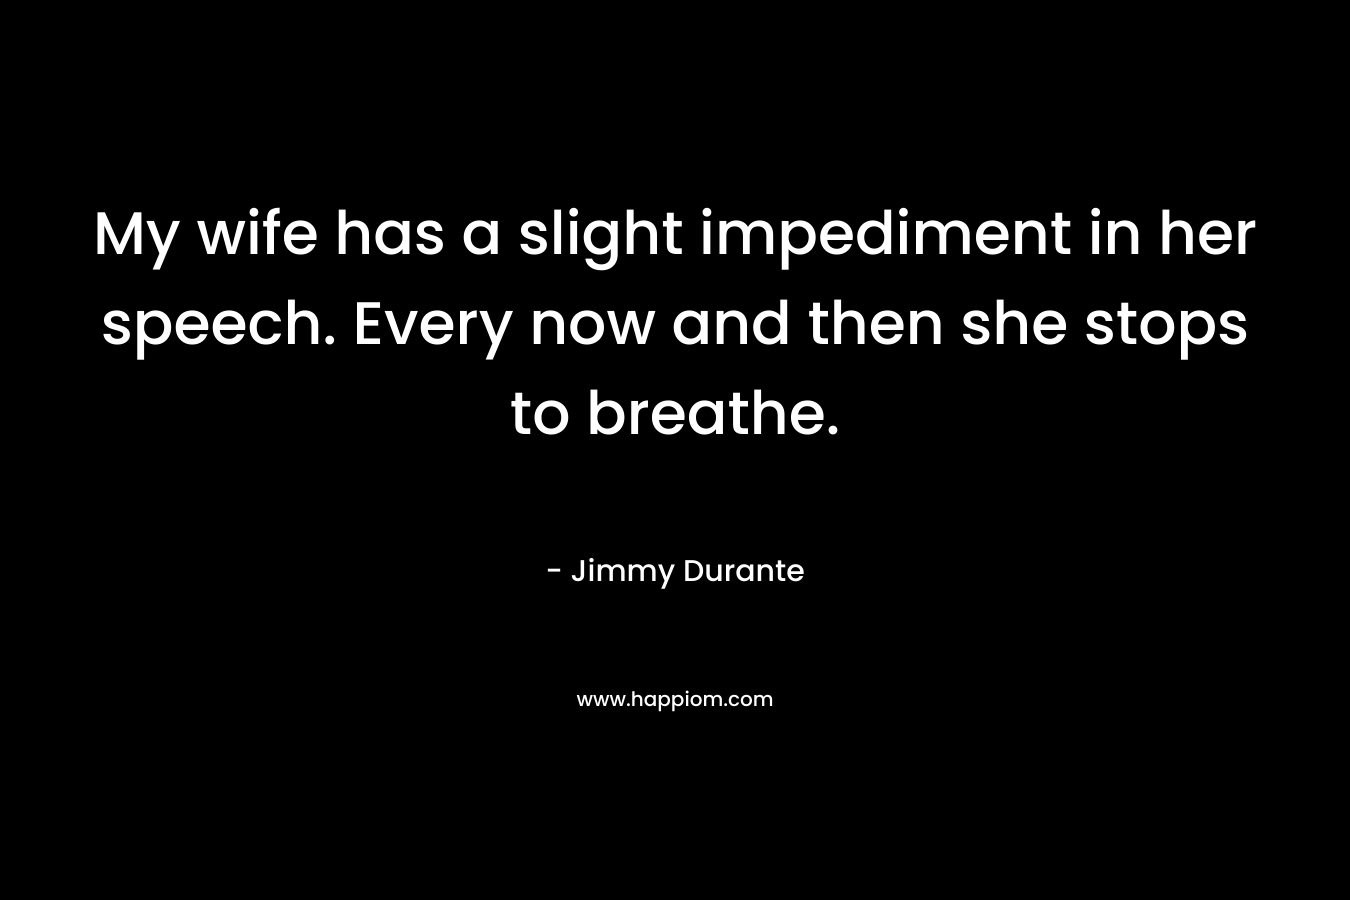 My wife has a slight impediment in her speech. Every now and then she stops to breathe. – Jimmy Durante